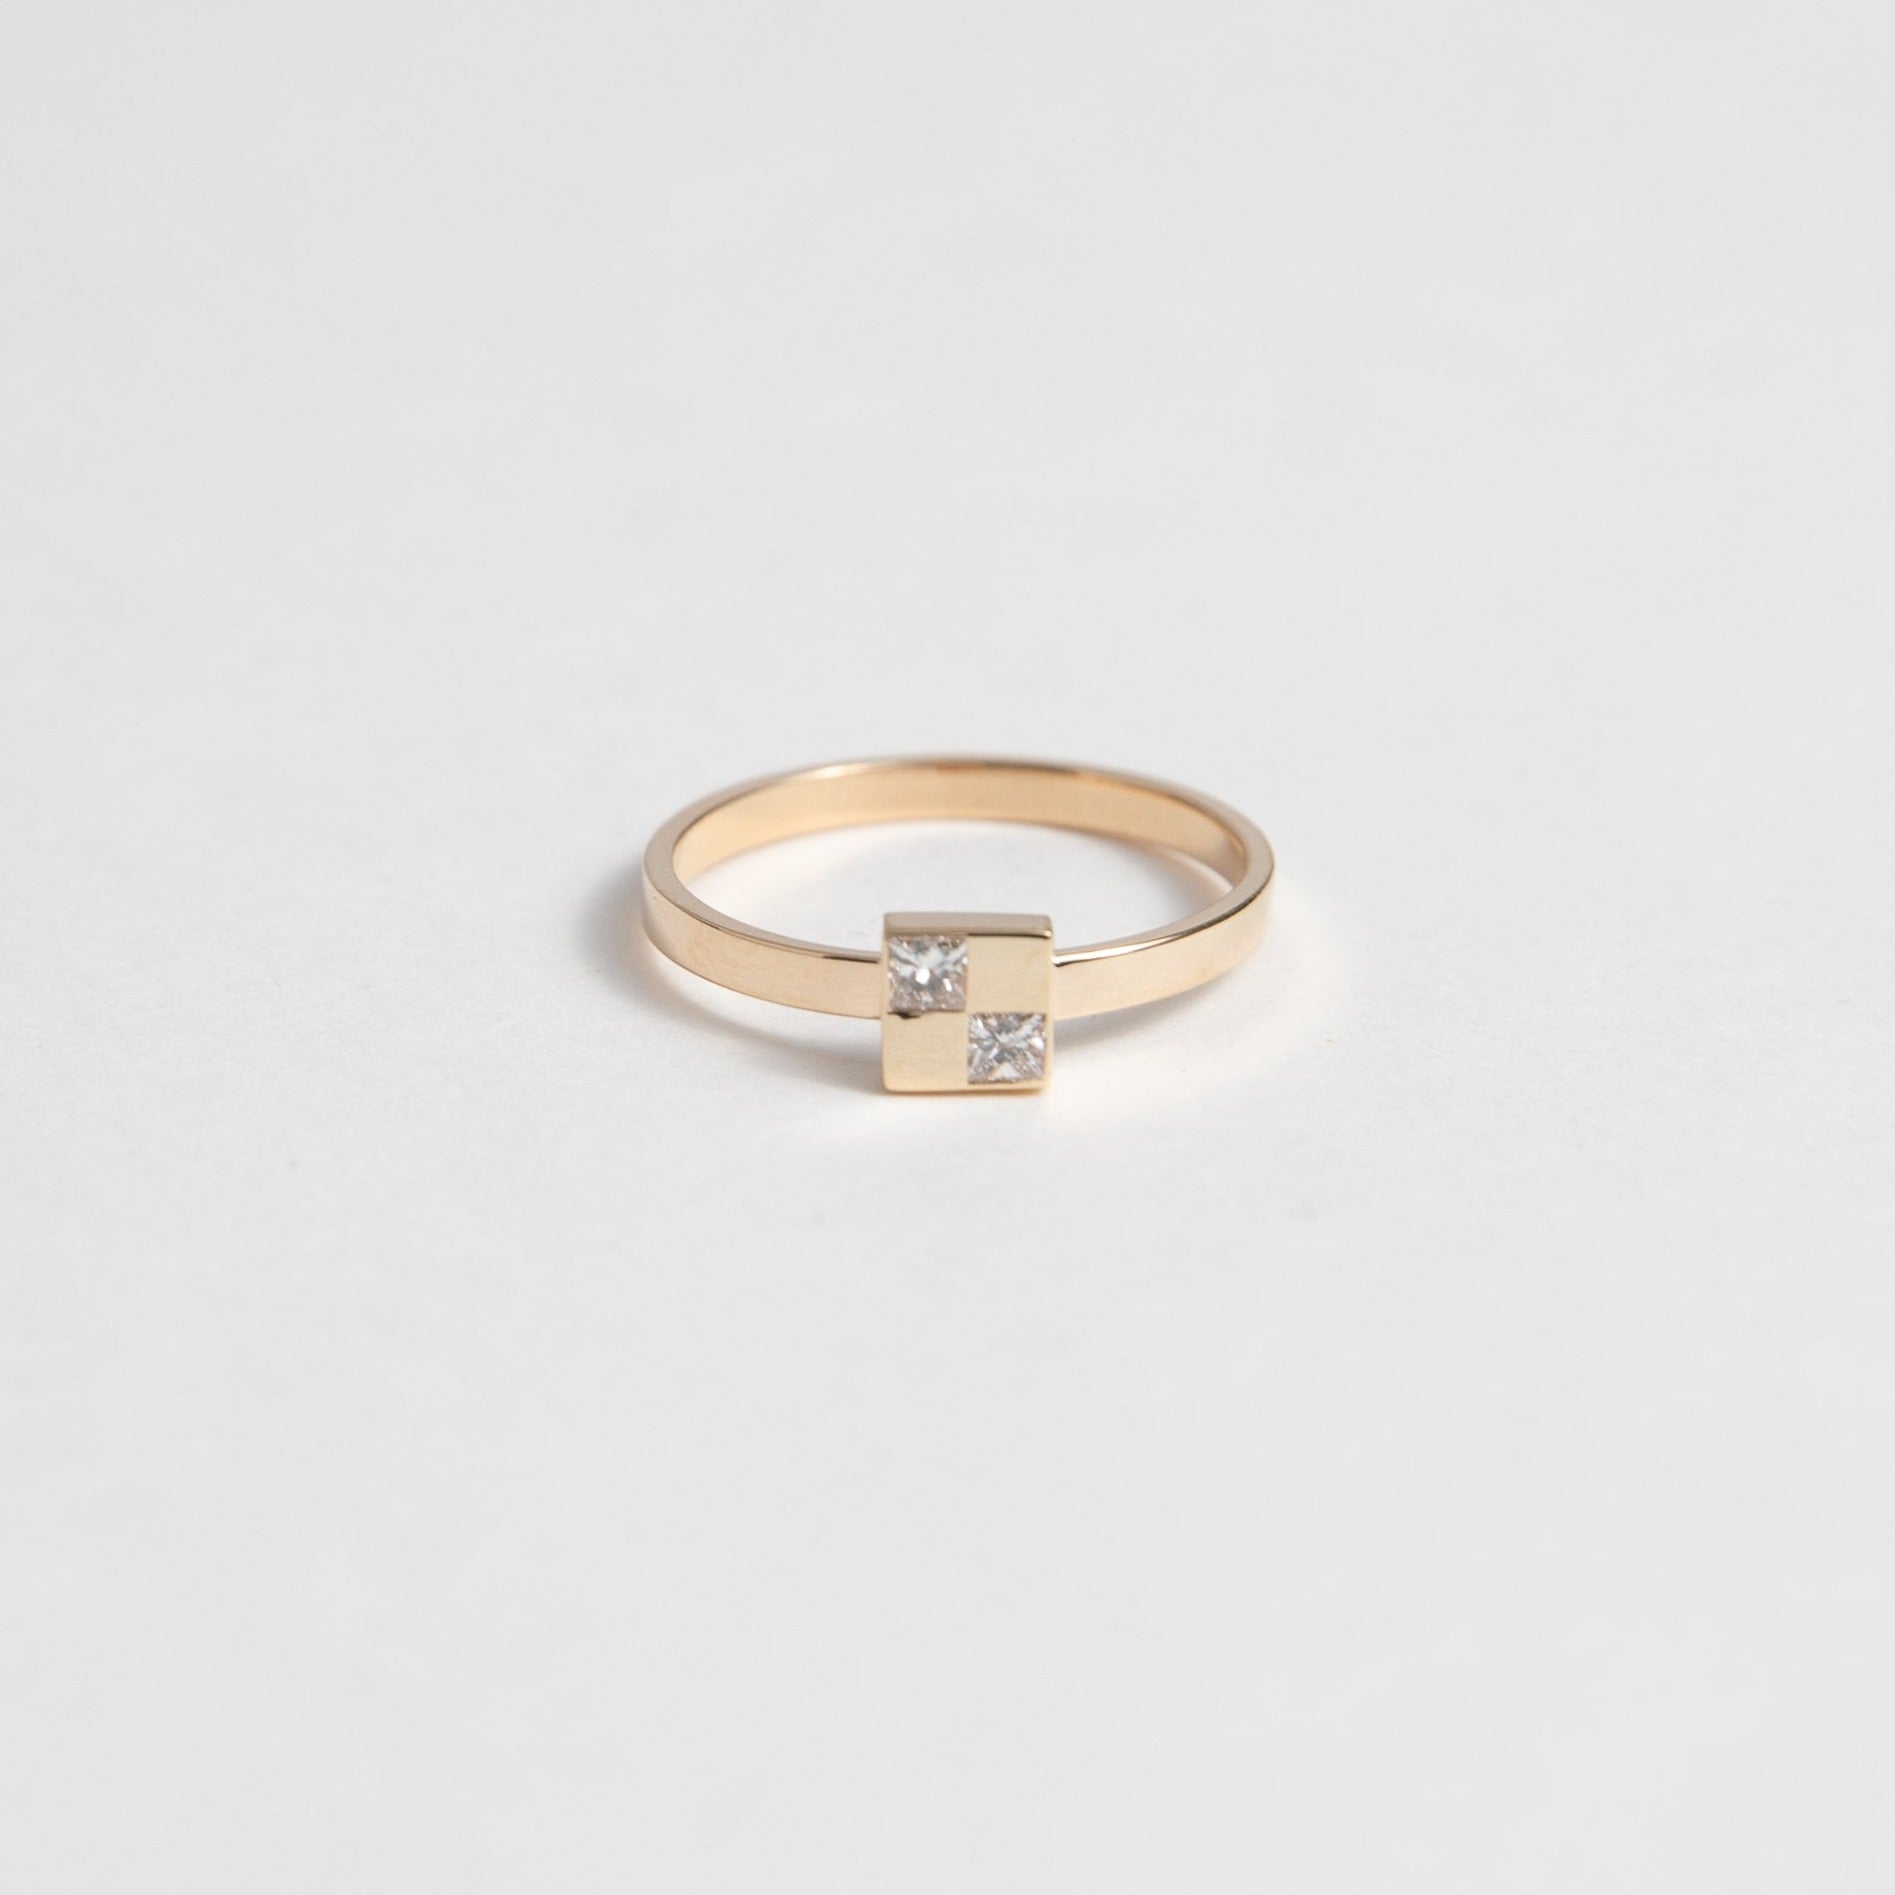 Sudu Unique Ring in 14k Yellow Gold set with princess cut square diamonds by SHW Fine Jewelry New York City